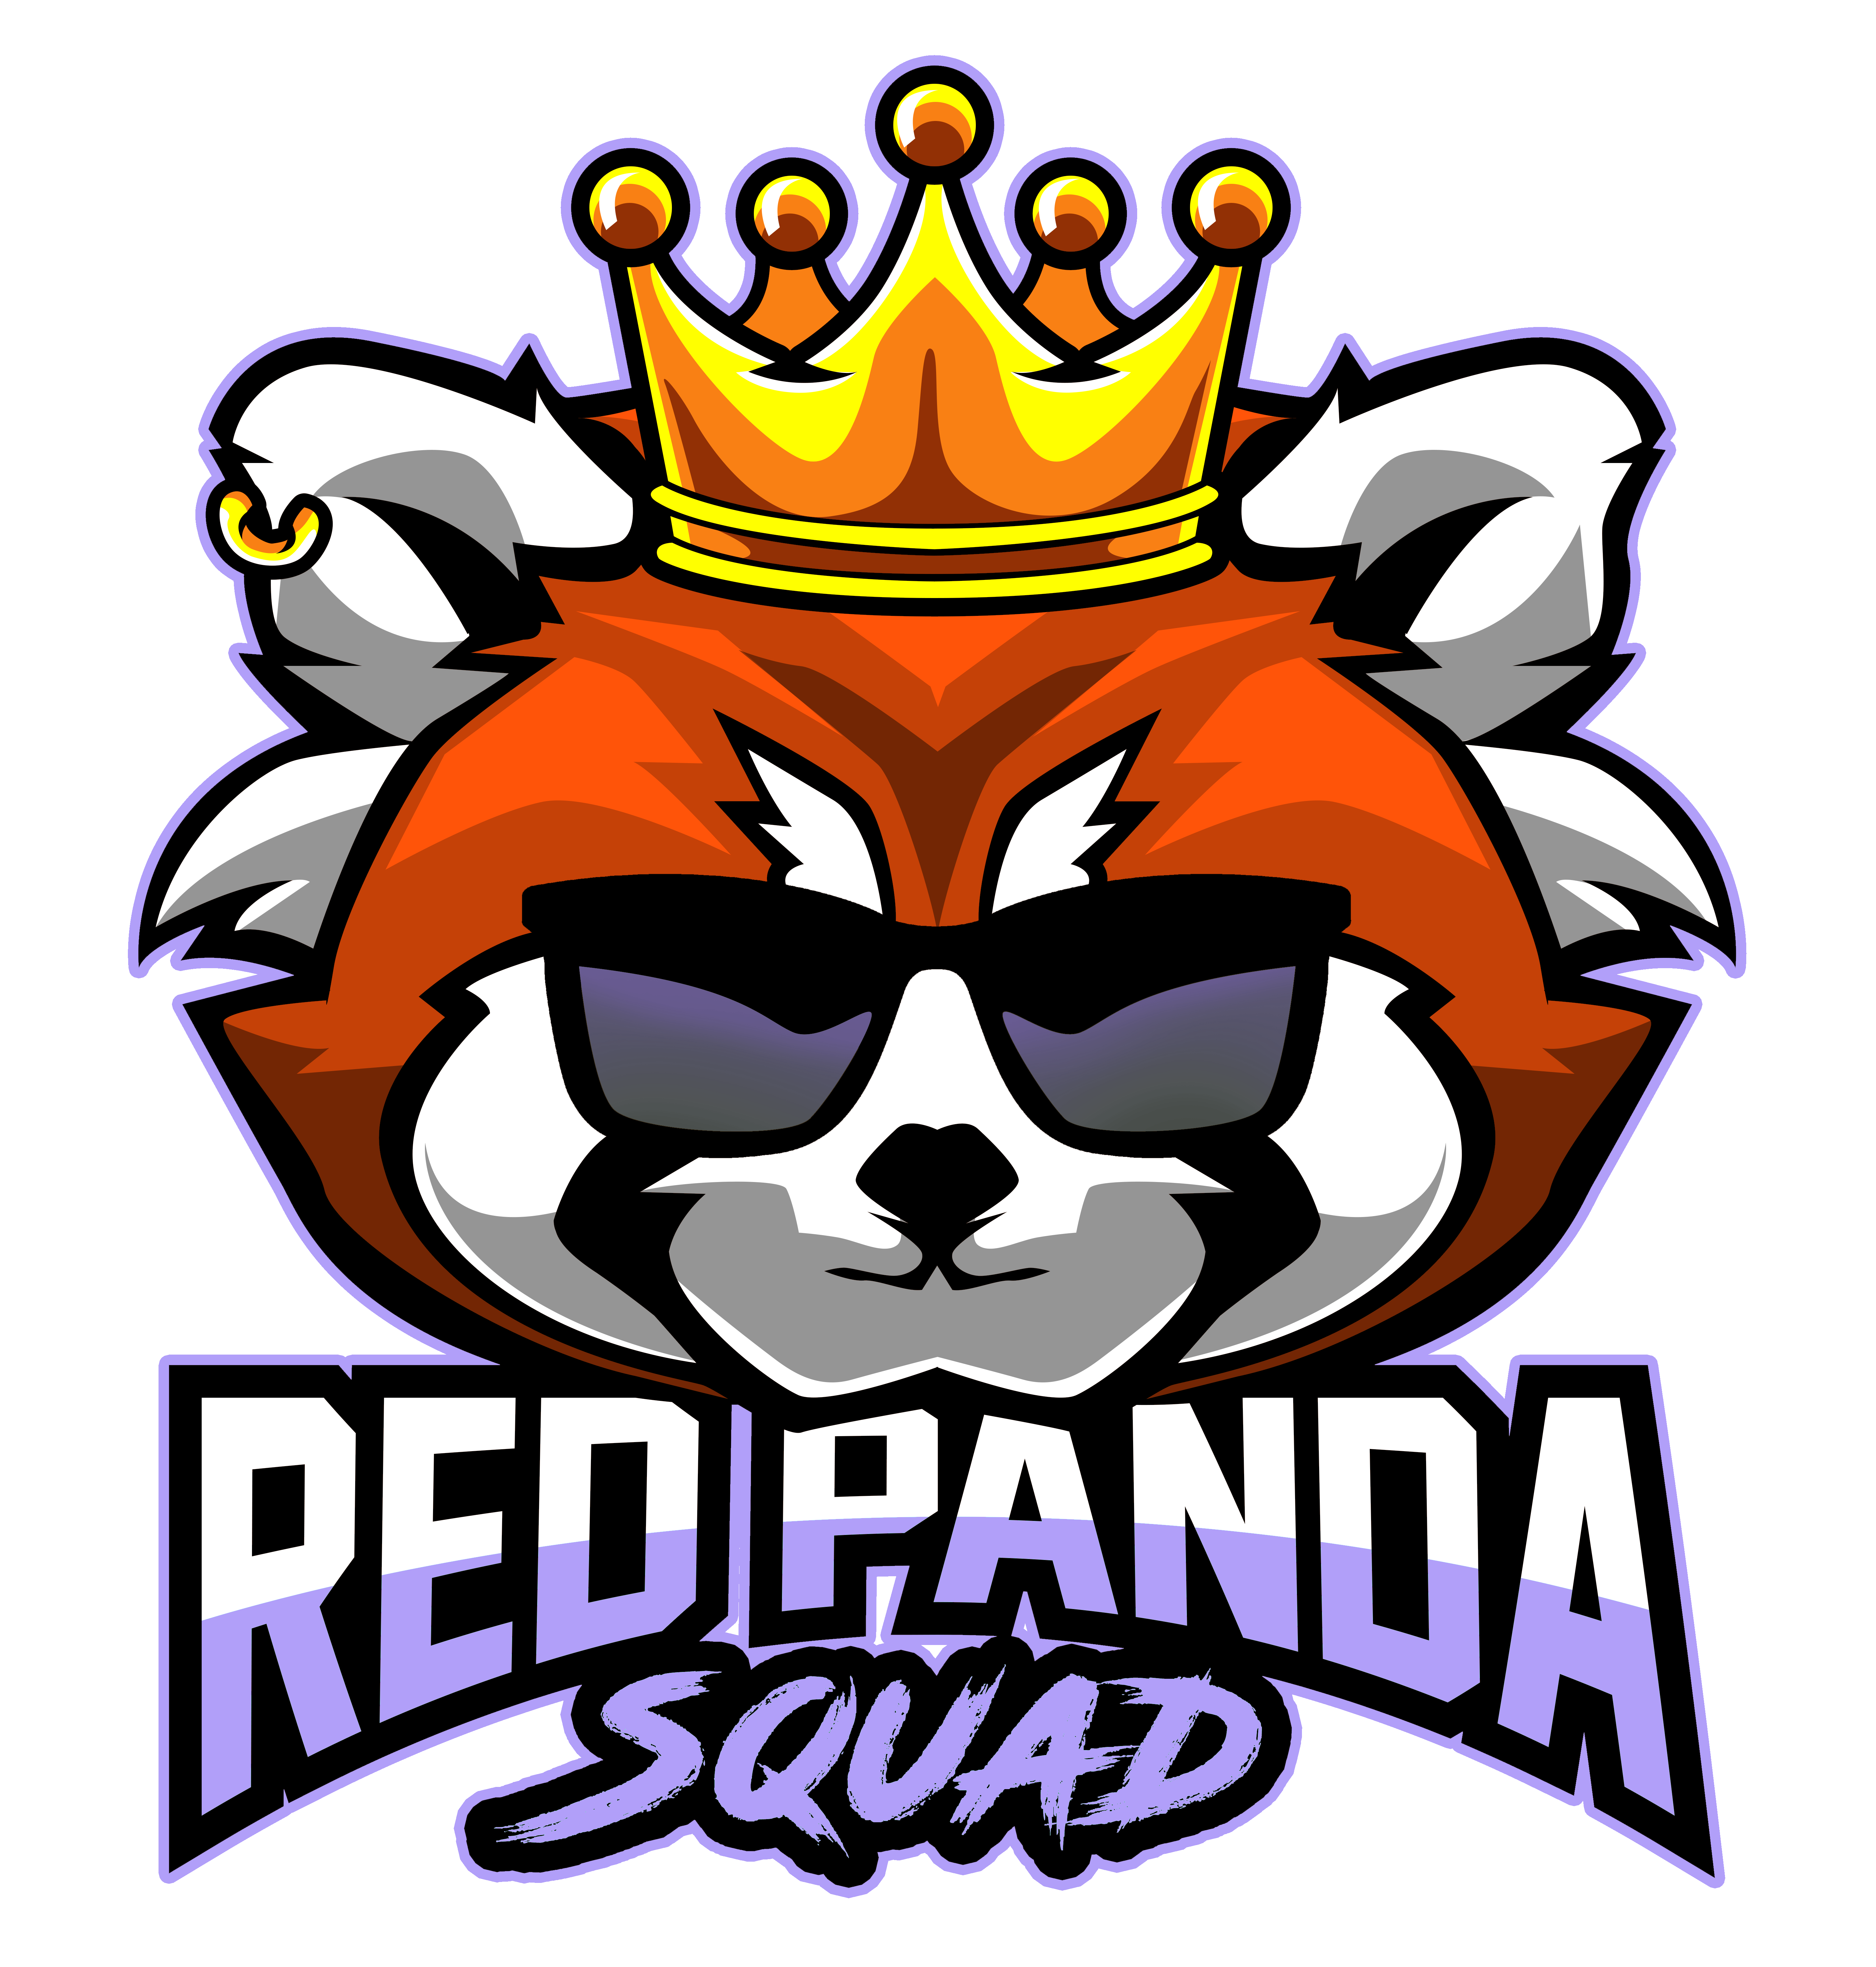 logo with text Red Panda Squad and image of red panda weaing sunglasses and crown.